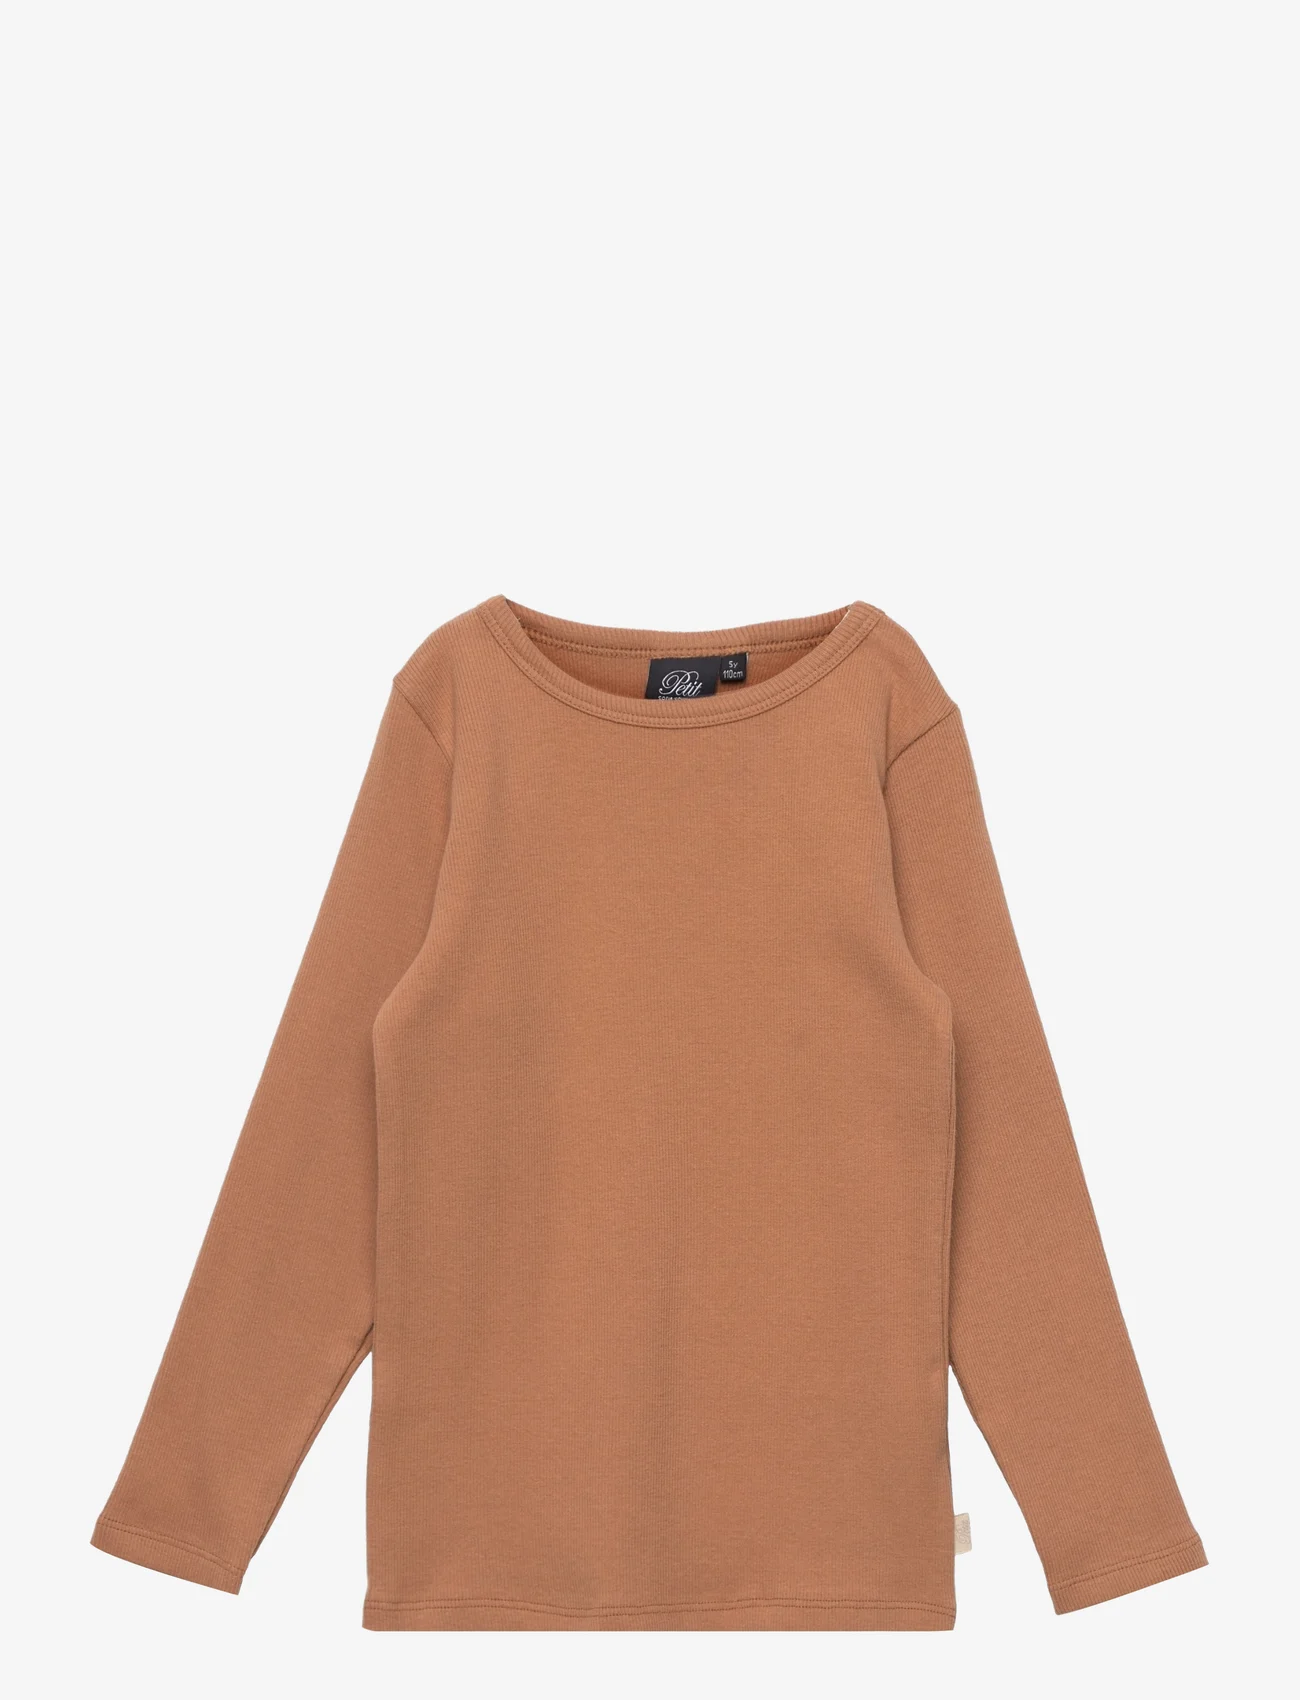 Sofie Schnoor Baby and Kids - T-shirt long-sleeve - långärmade t-shirts - dusty brown - 0